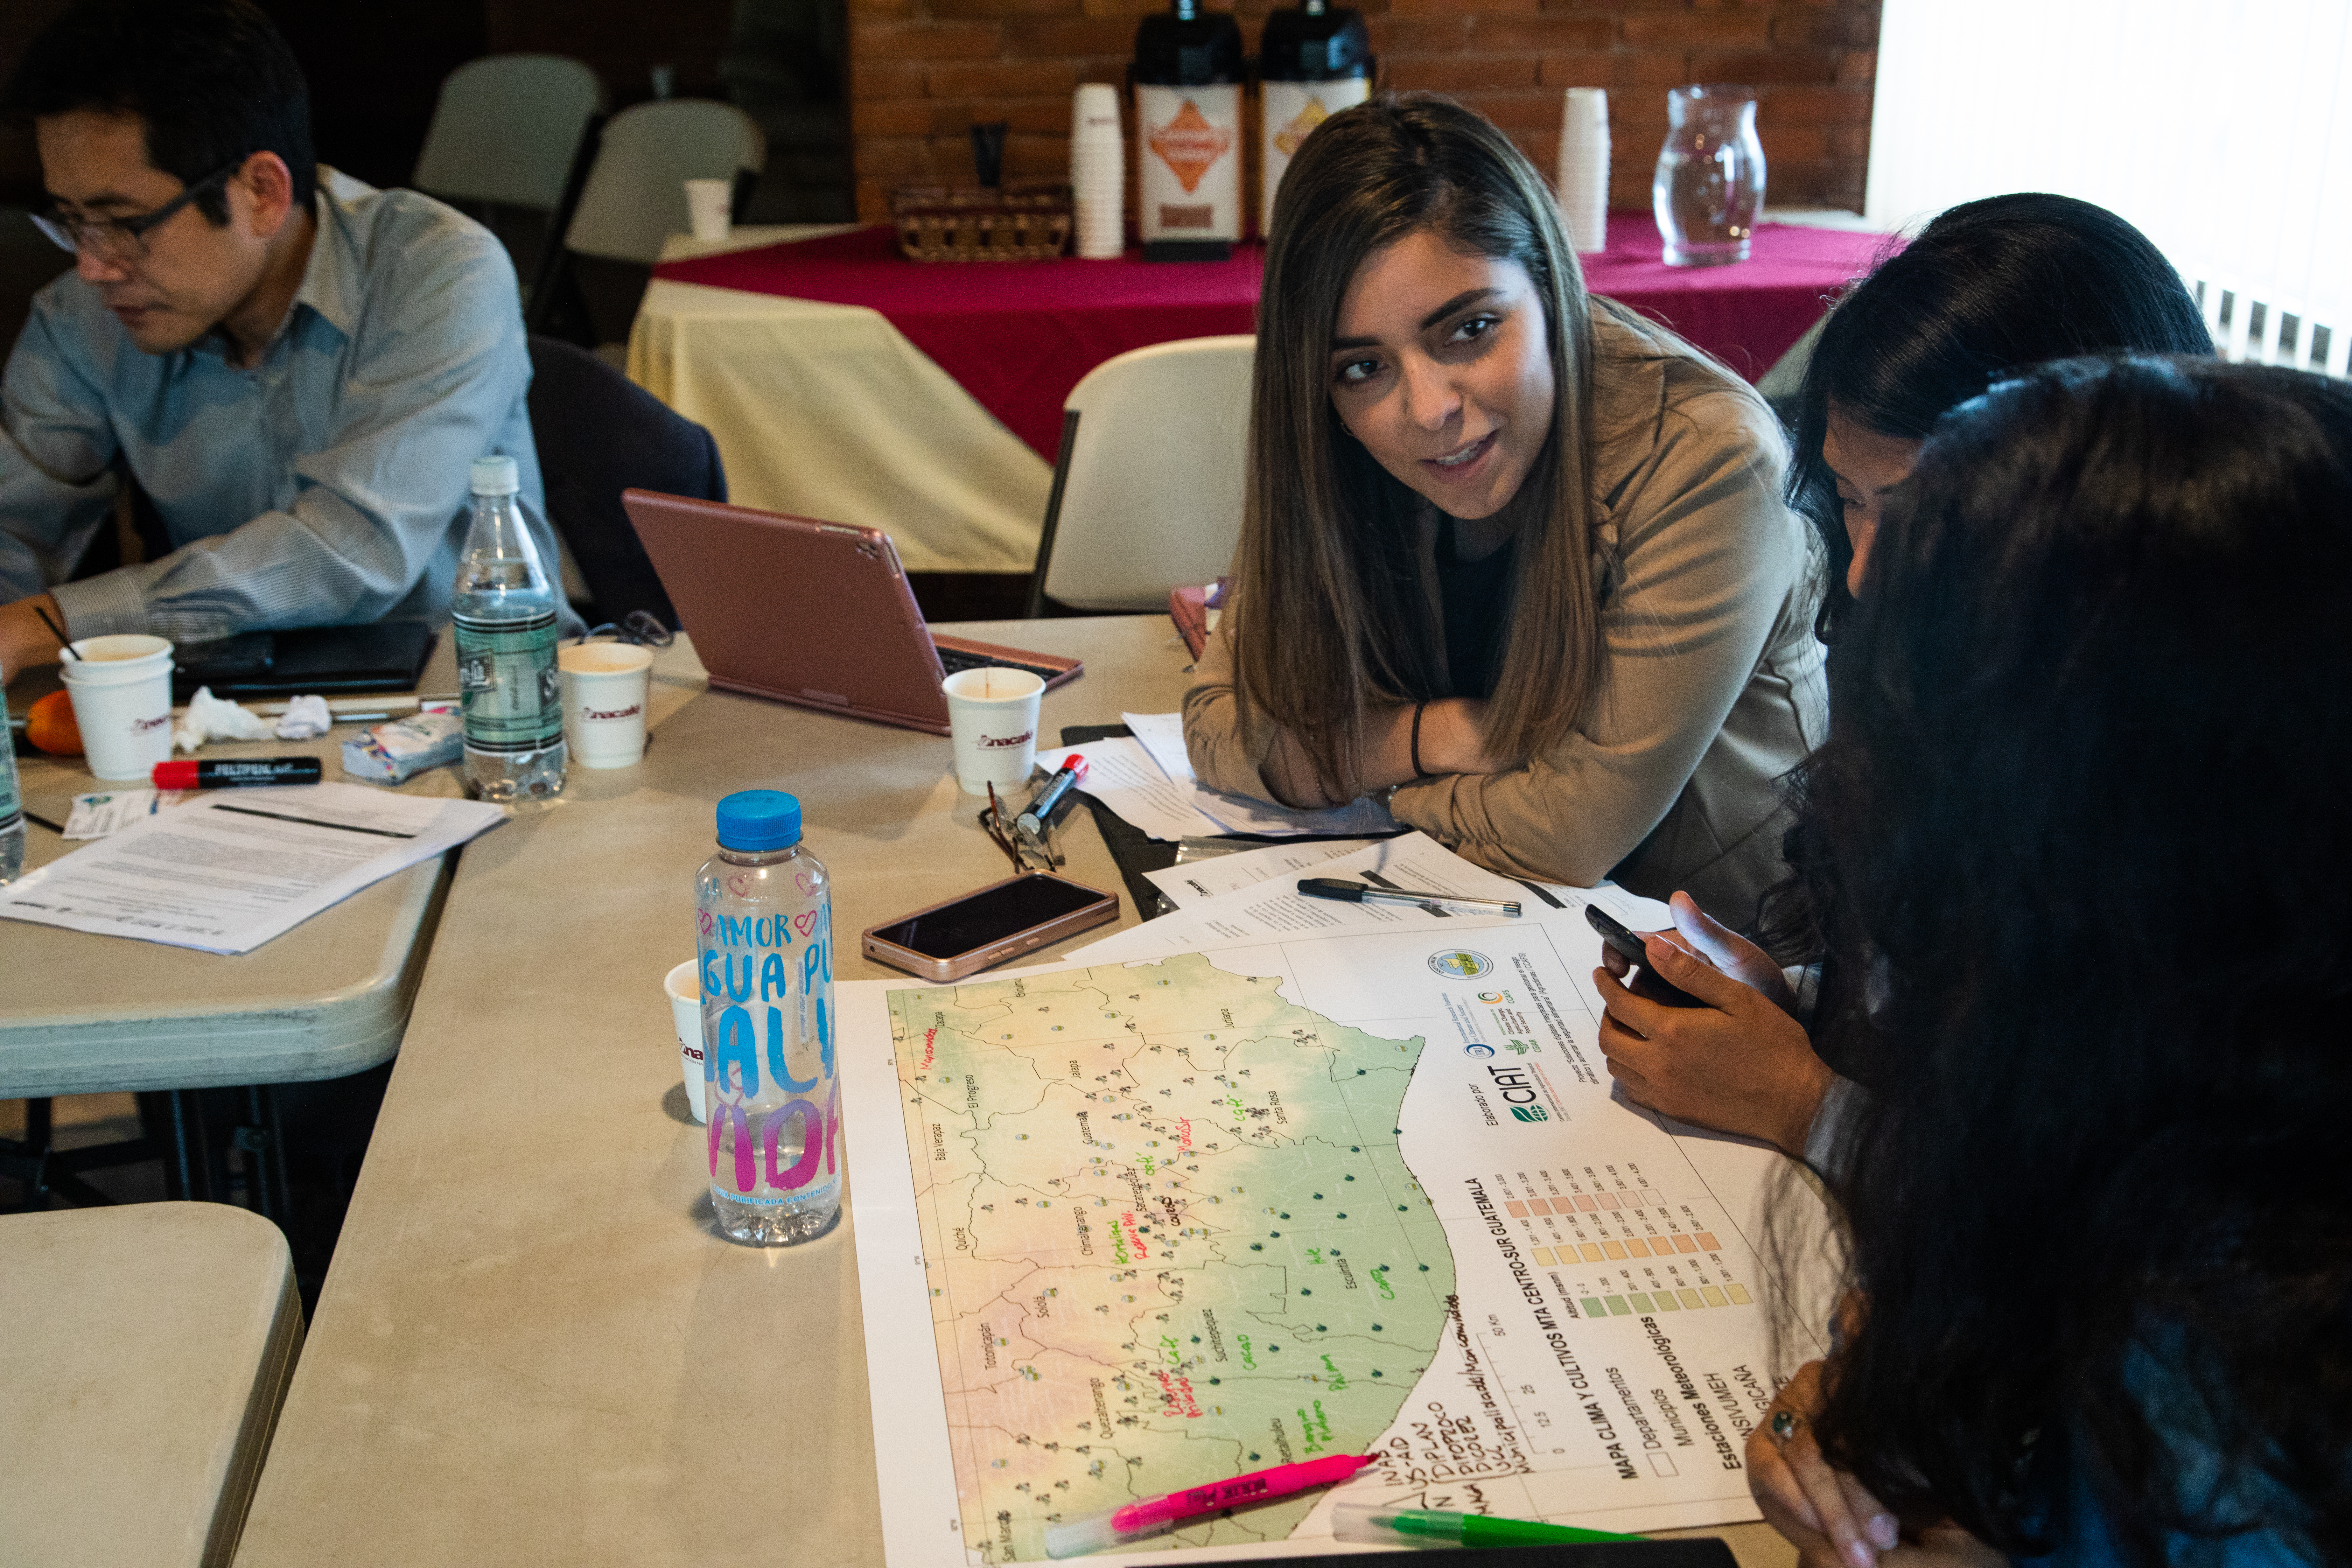 Three Guatemalan women lean over a map of southern Guatemala placed on a folding table in a meeting room. Only one woman's face faces the camera. Their map has highlighter and pen markings on it and they are in deep discussion.